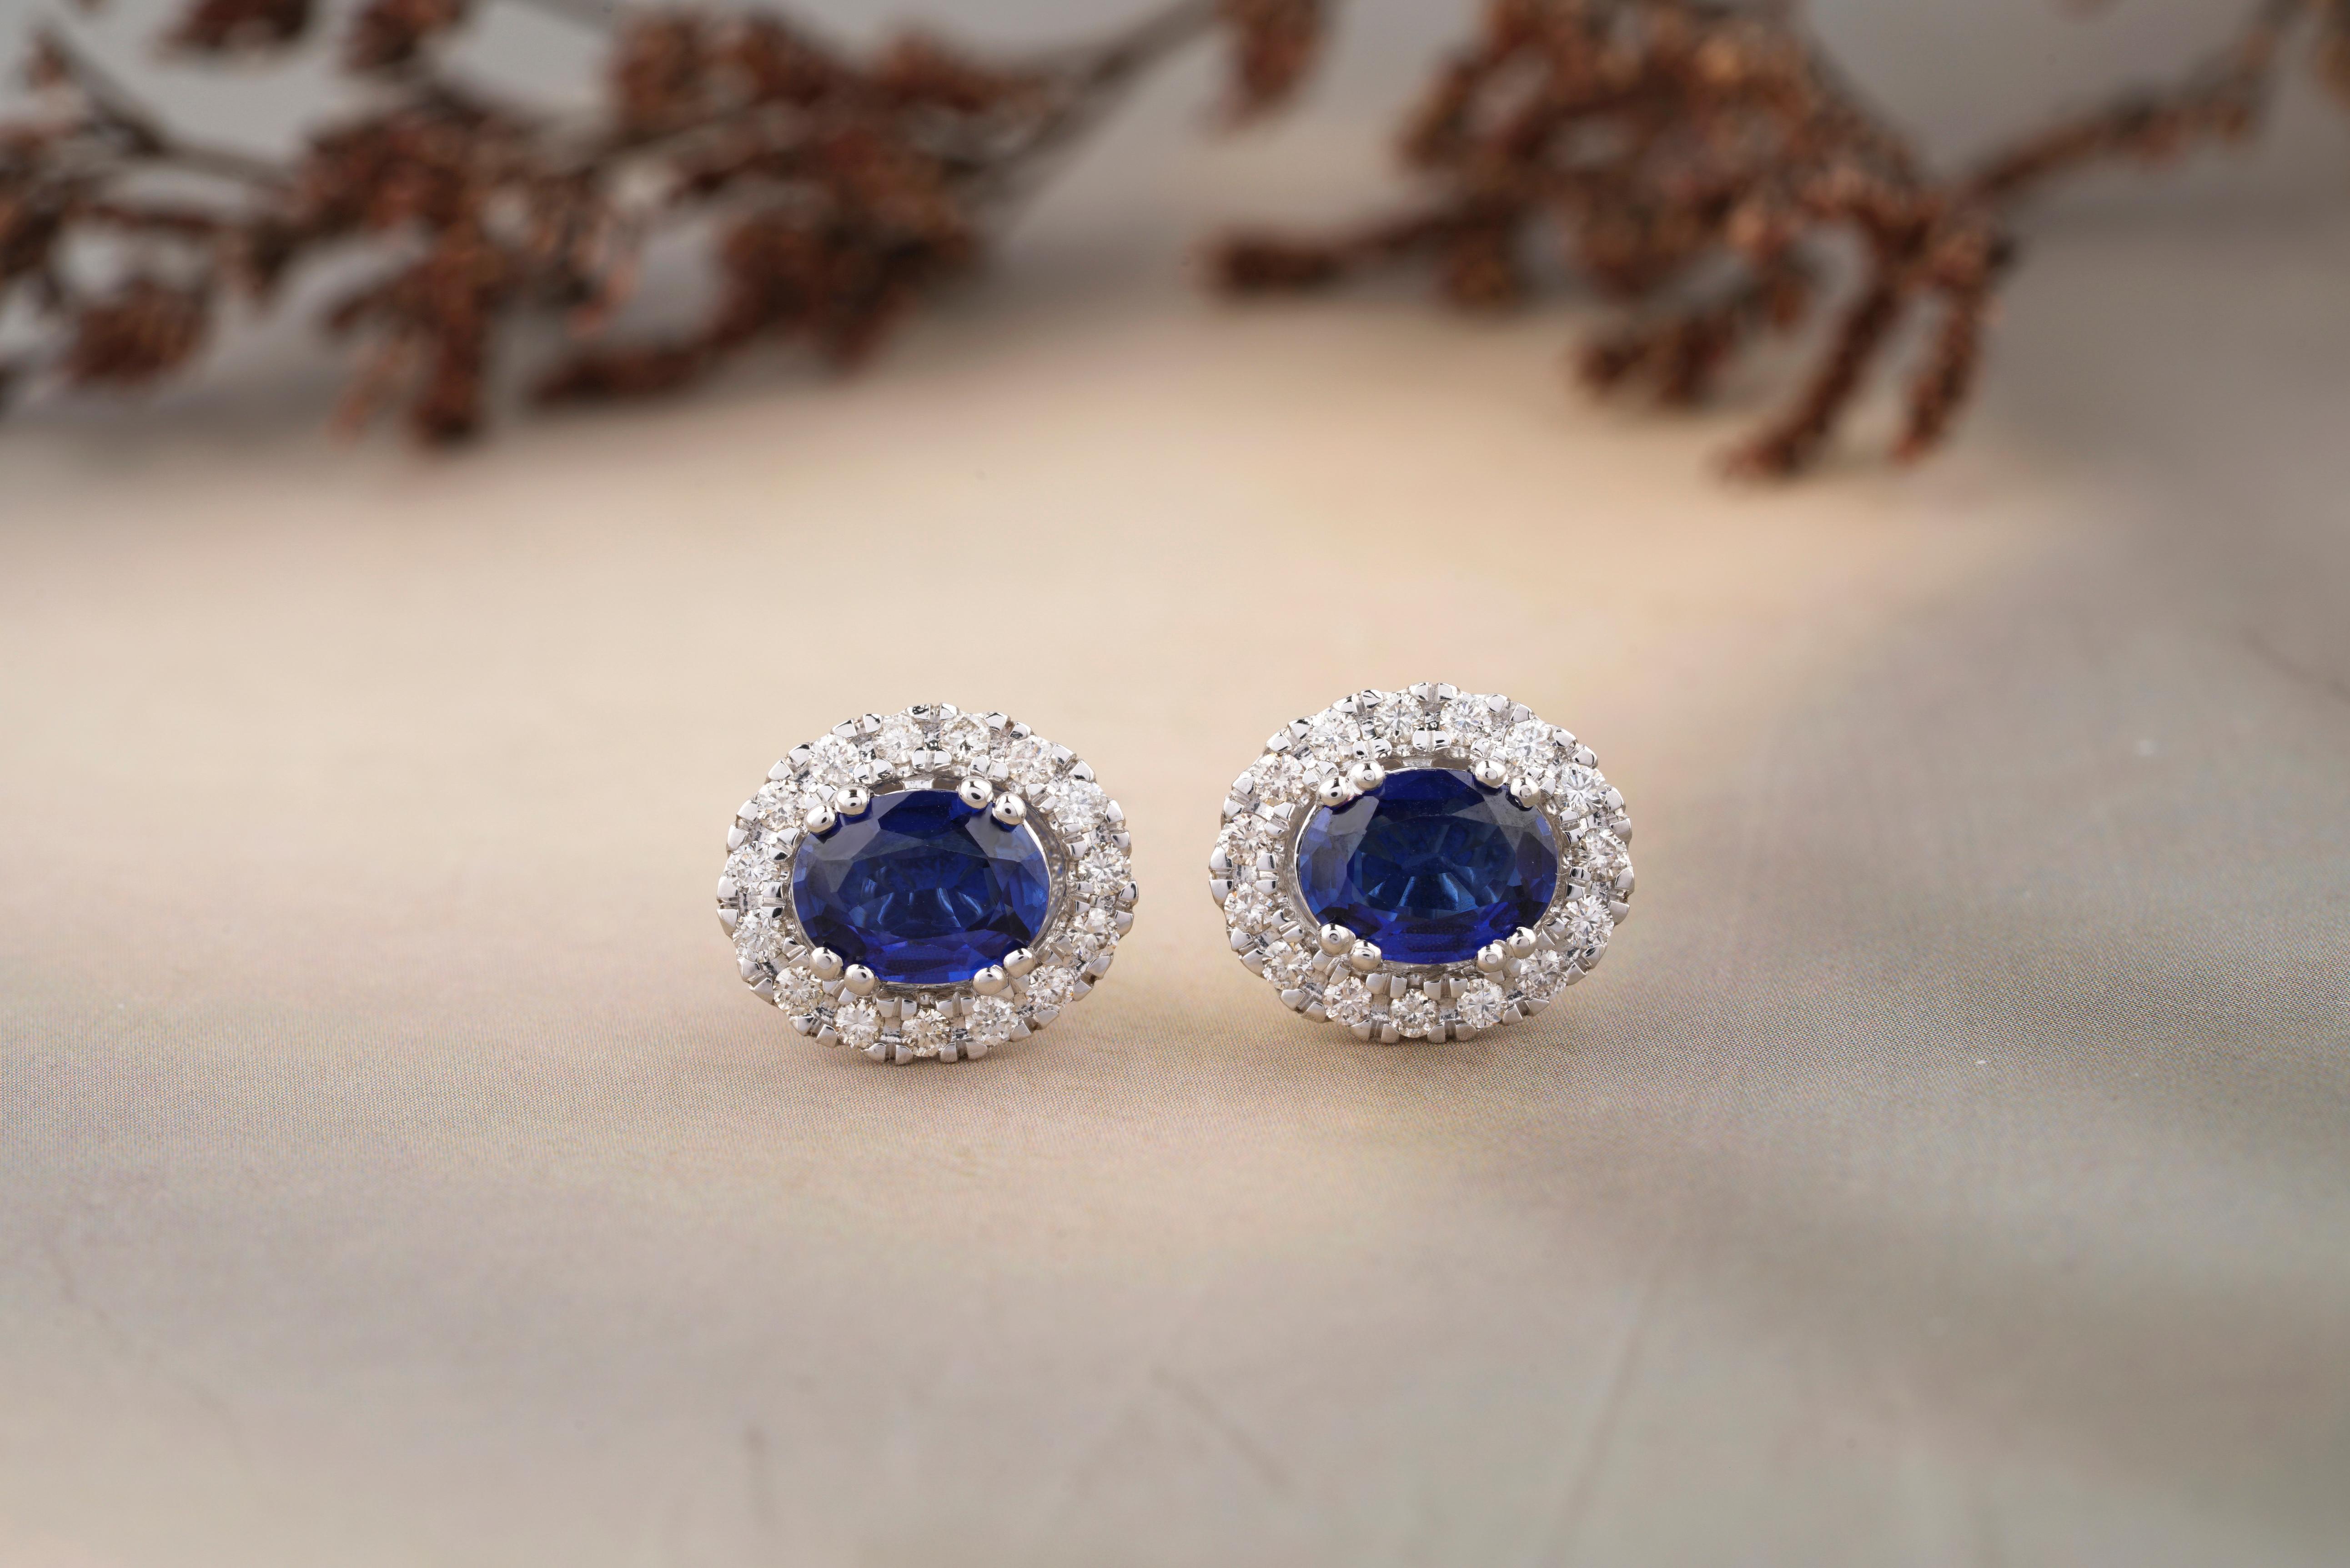 These earrings feature high-quality oval-shaped blue sapphire gemstones that are perfectly complemented by sparkling diamonds arranged on the outline in a classic stud design.

THE STONES-

These earrings feature round diamonds weighing 0.54 carats,